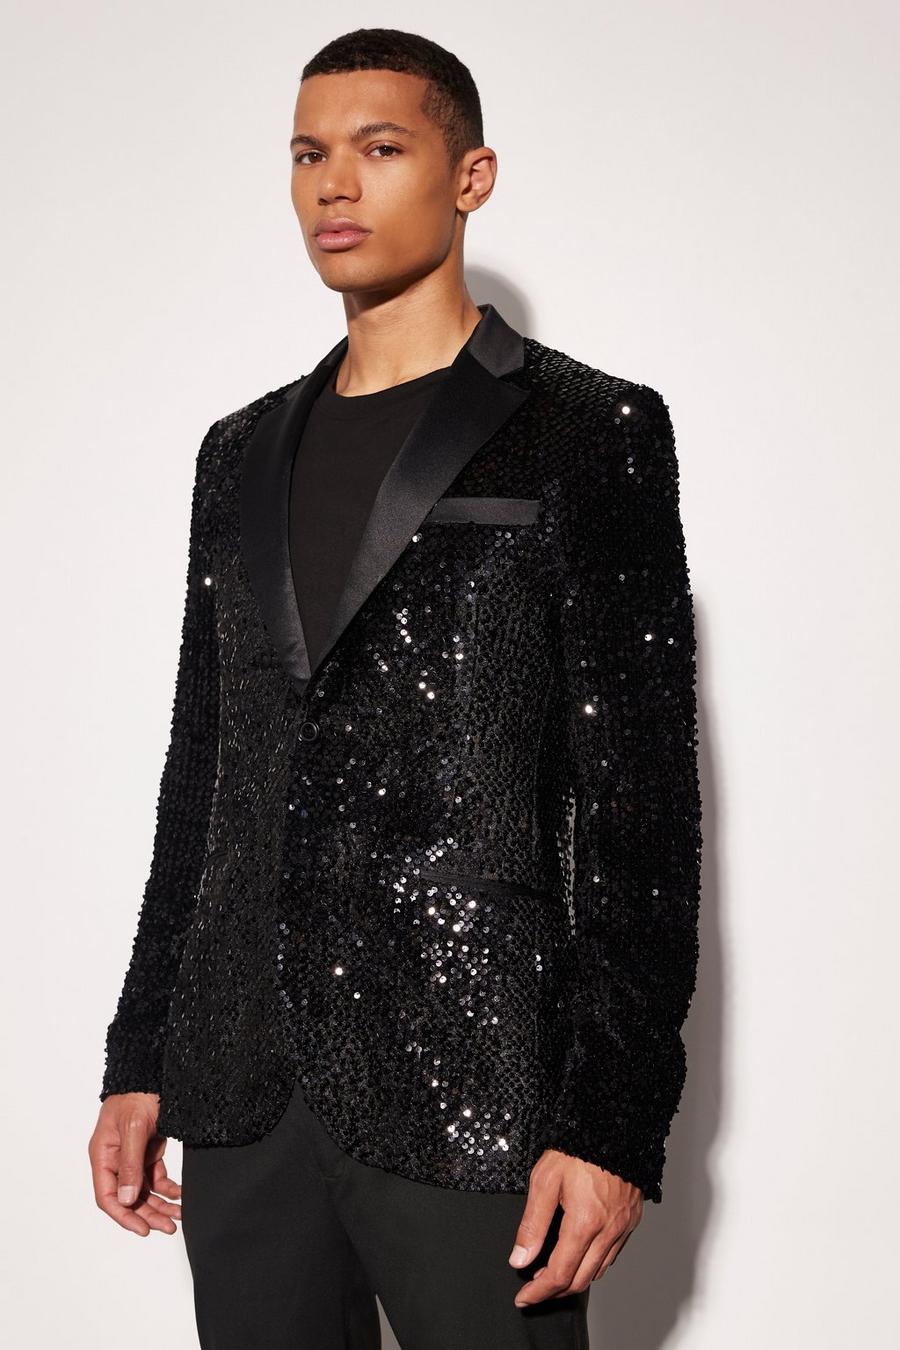 Black Tall Skinny Sequin Blazer With Contrast Lapel